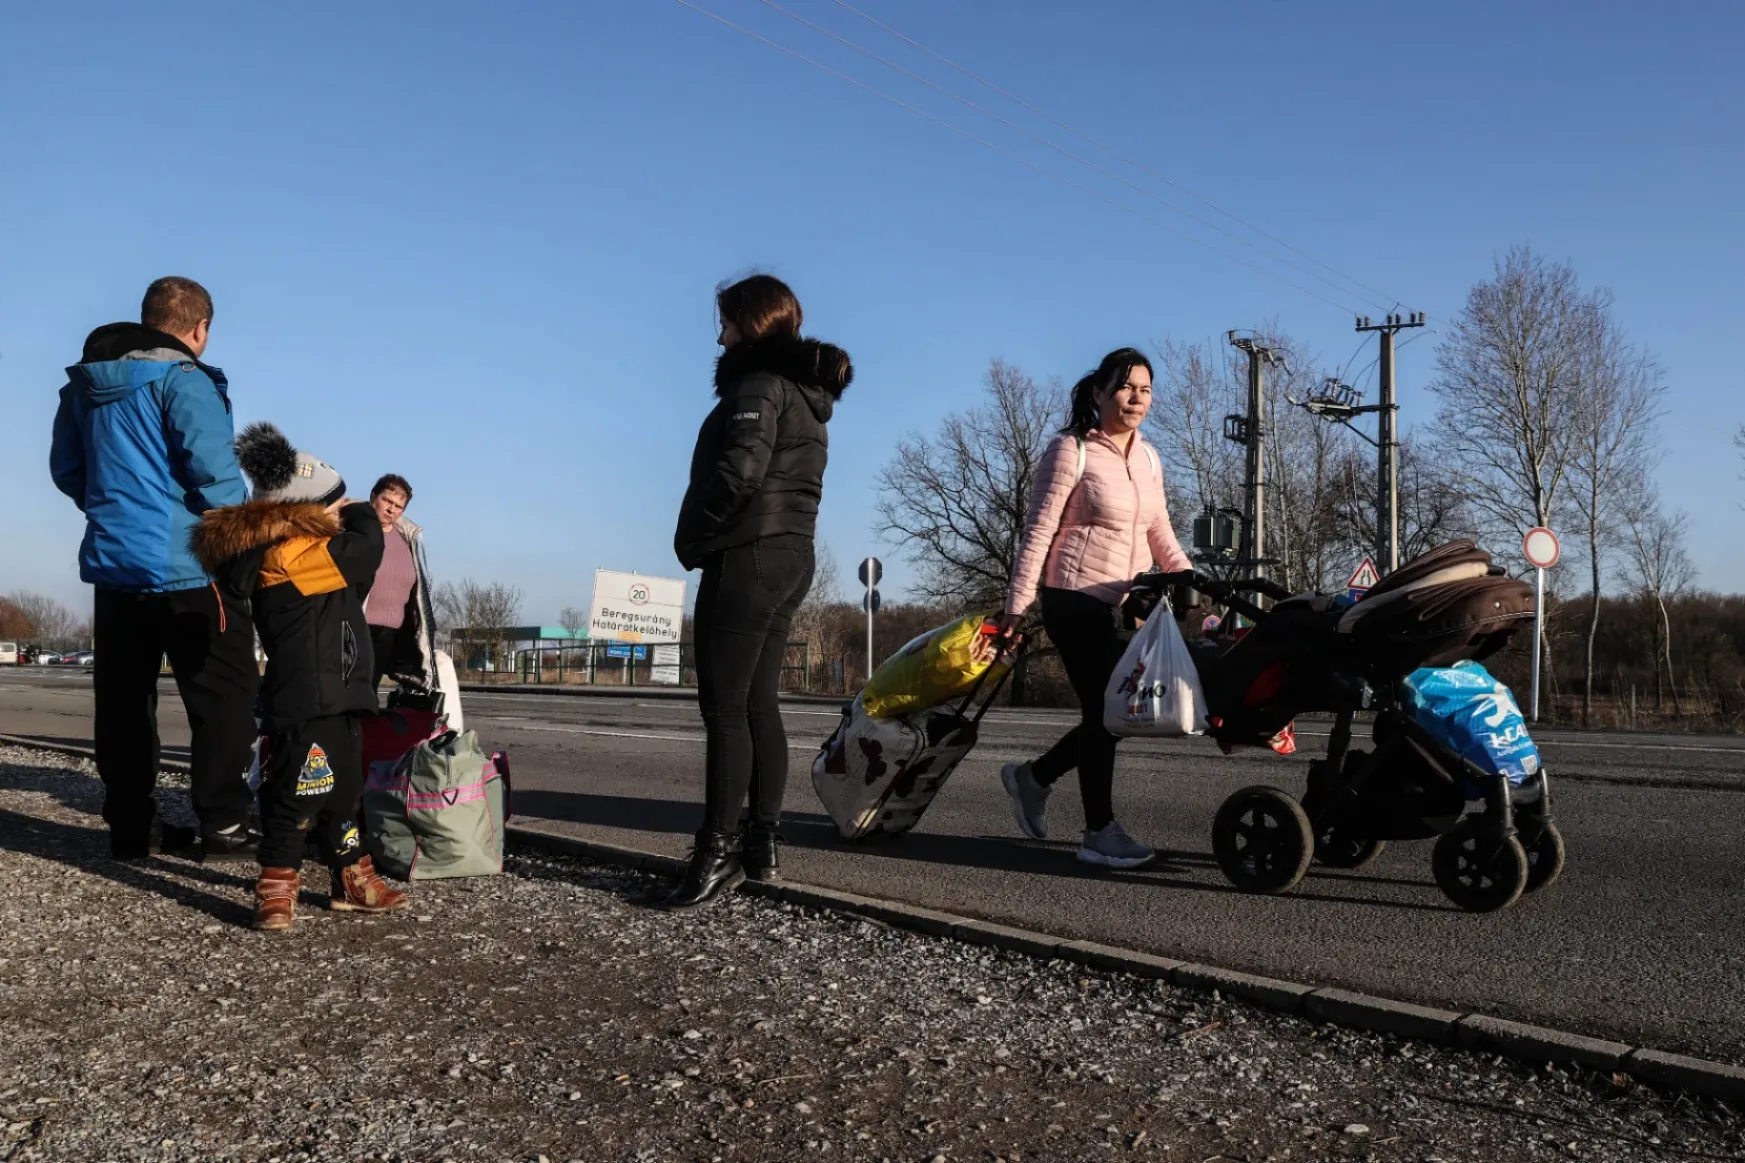 Ukrainian refugees aren't too eager to stay in Hungary, and the state isn't too keen on encouraging them to do so